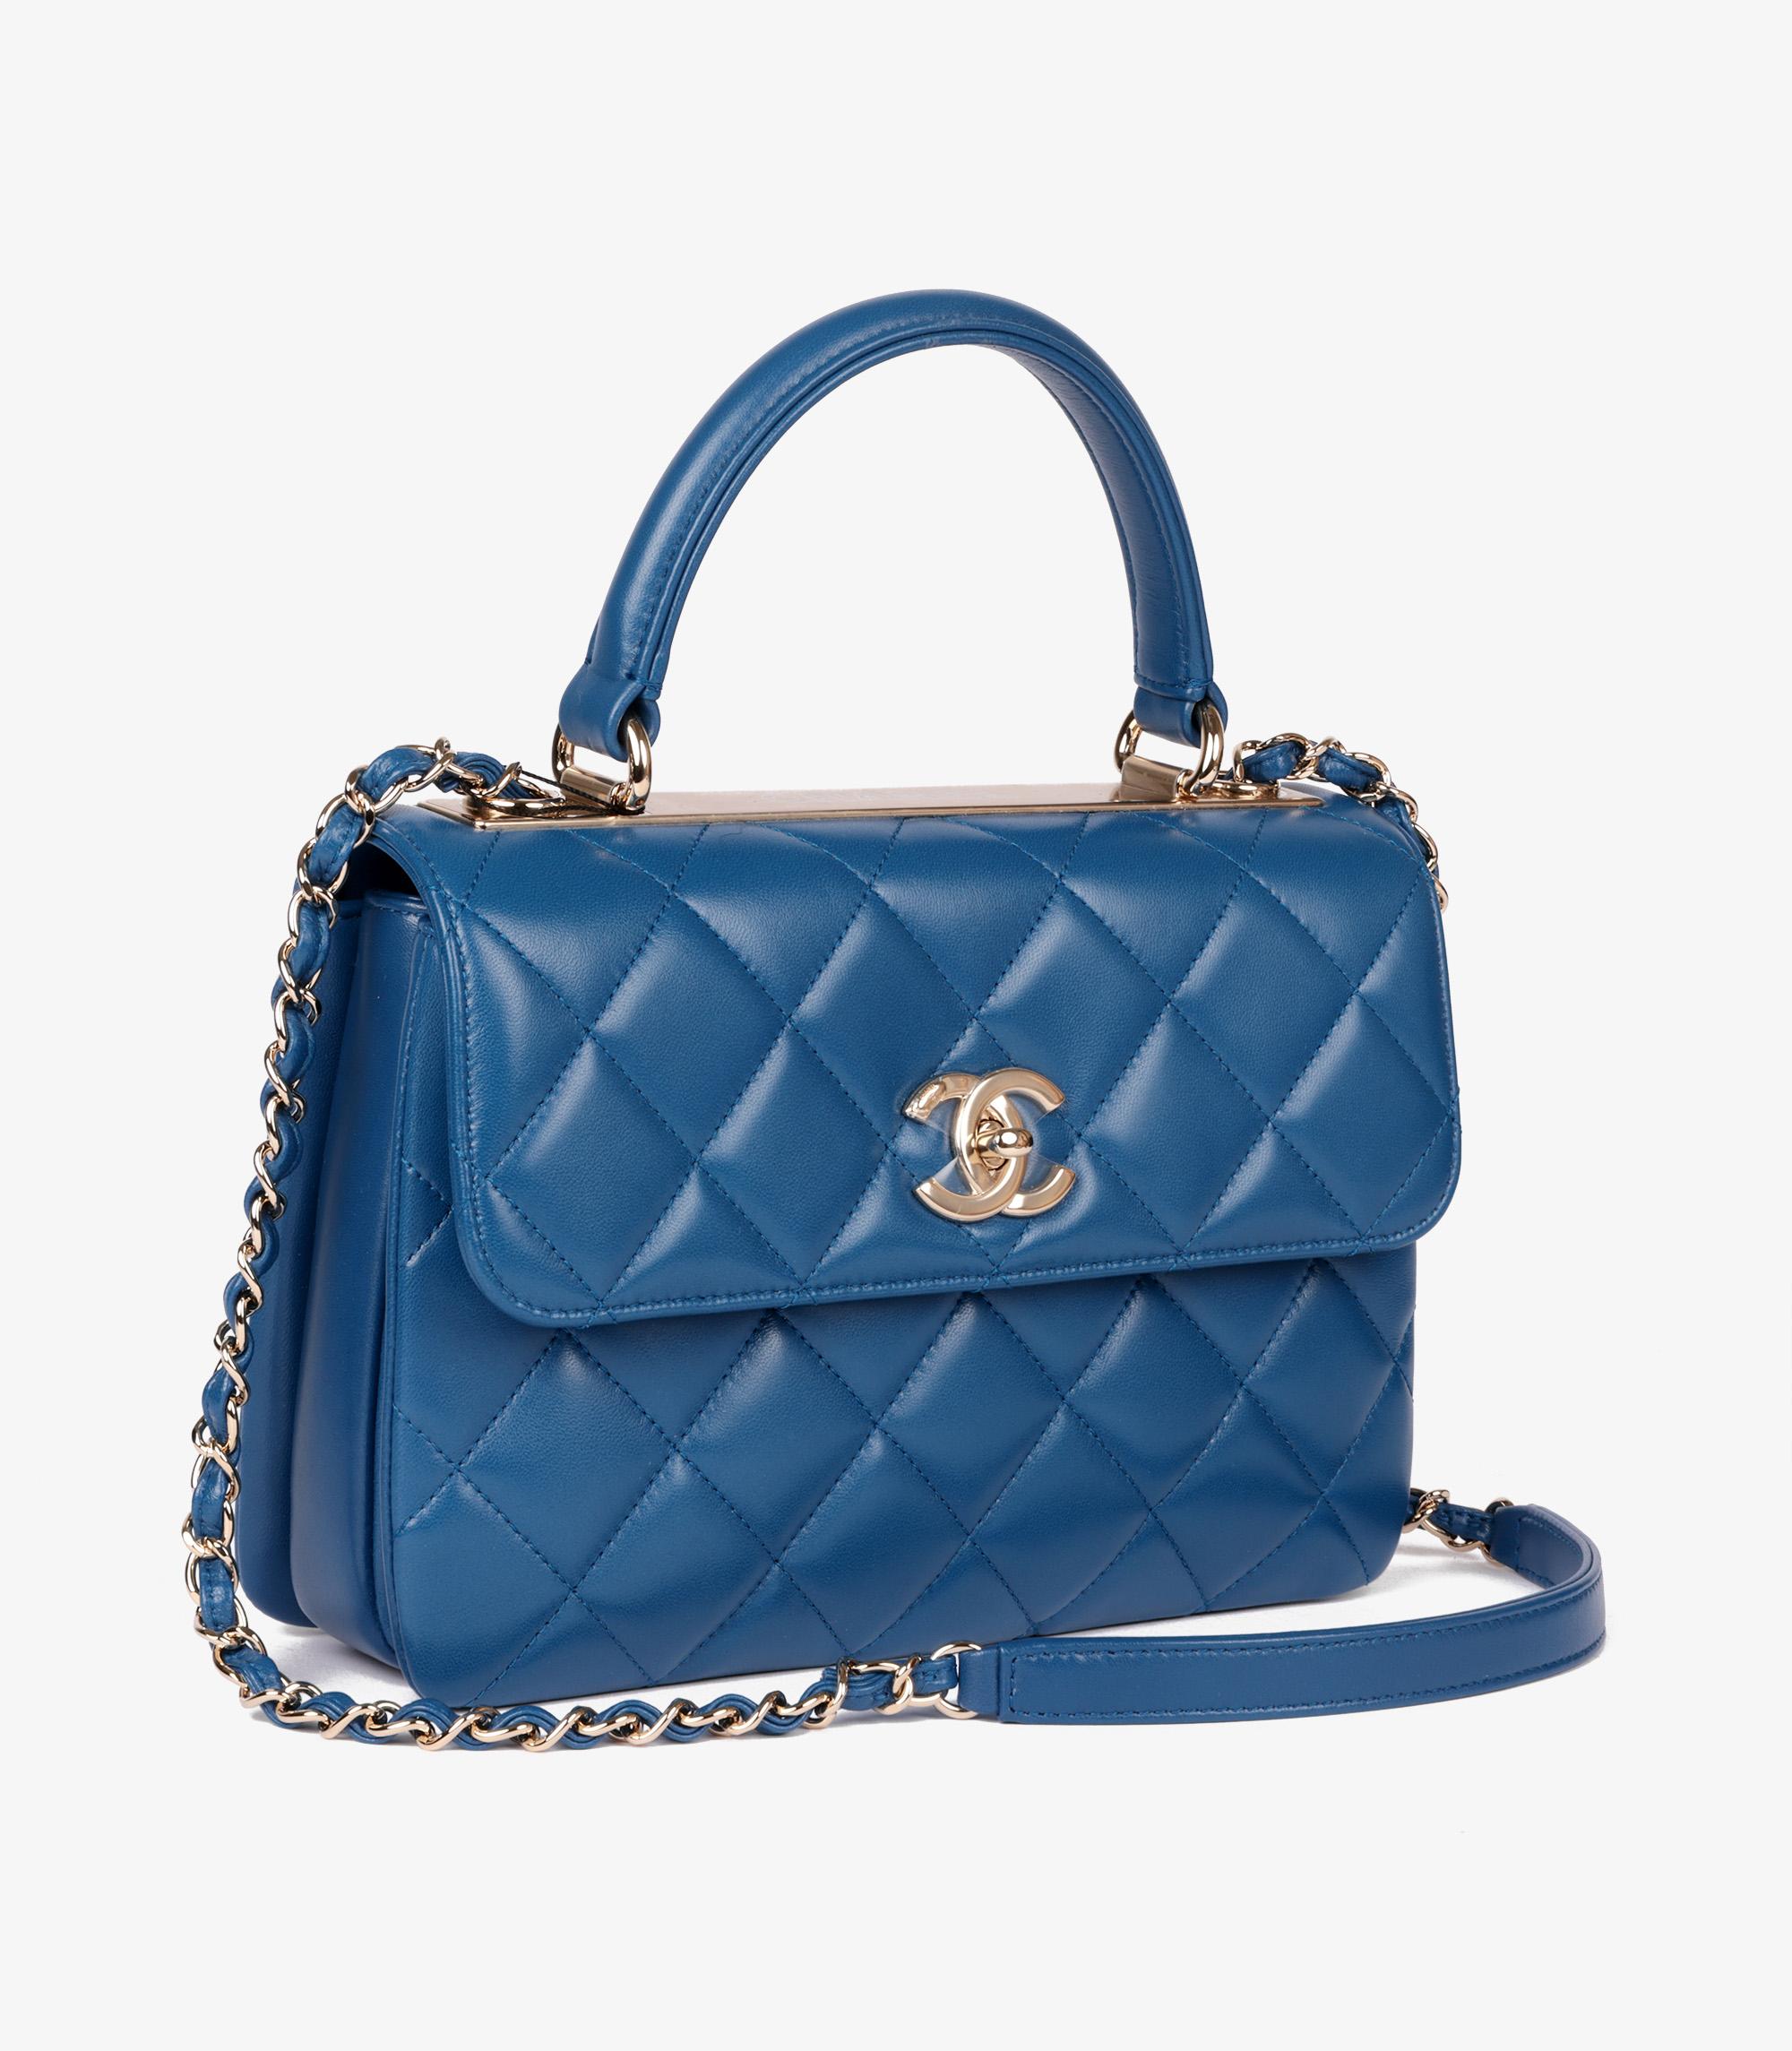 Chanel Blue Quilted Lambskin Leather Small Trendy CC Top Handle

Brand- Chanel
Model- Small Trendy CC Top Handle
Product Type- Shoulder, Top Handle
Serial Number- 24******
Age- Circa 2017
Accompanied By- Chanel Dust Bag, Box, Protective Felt, Care